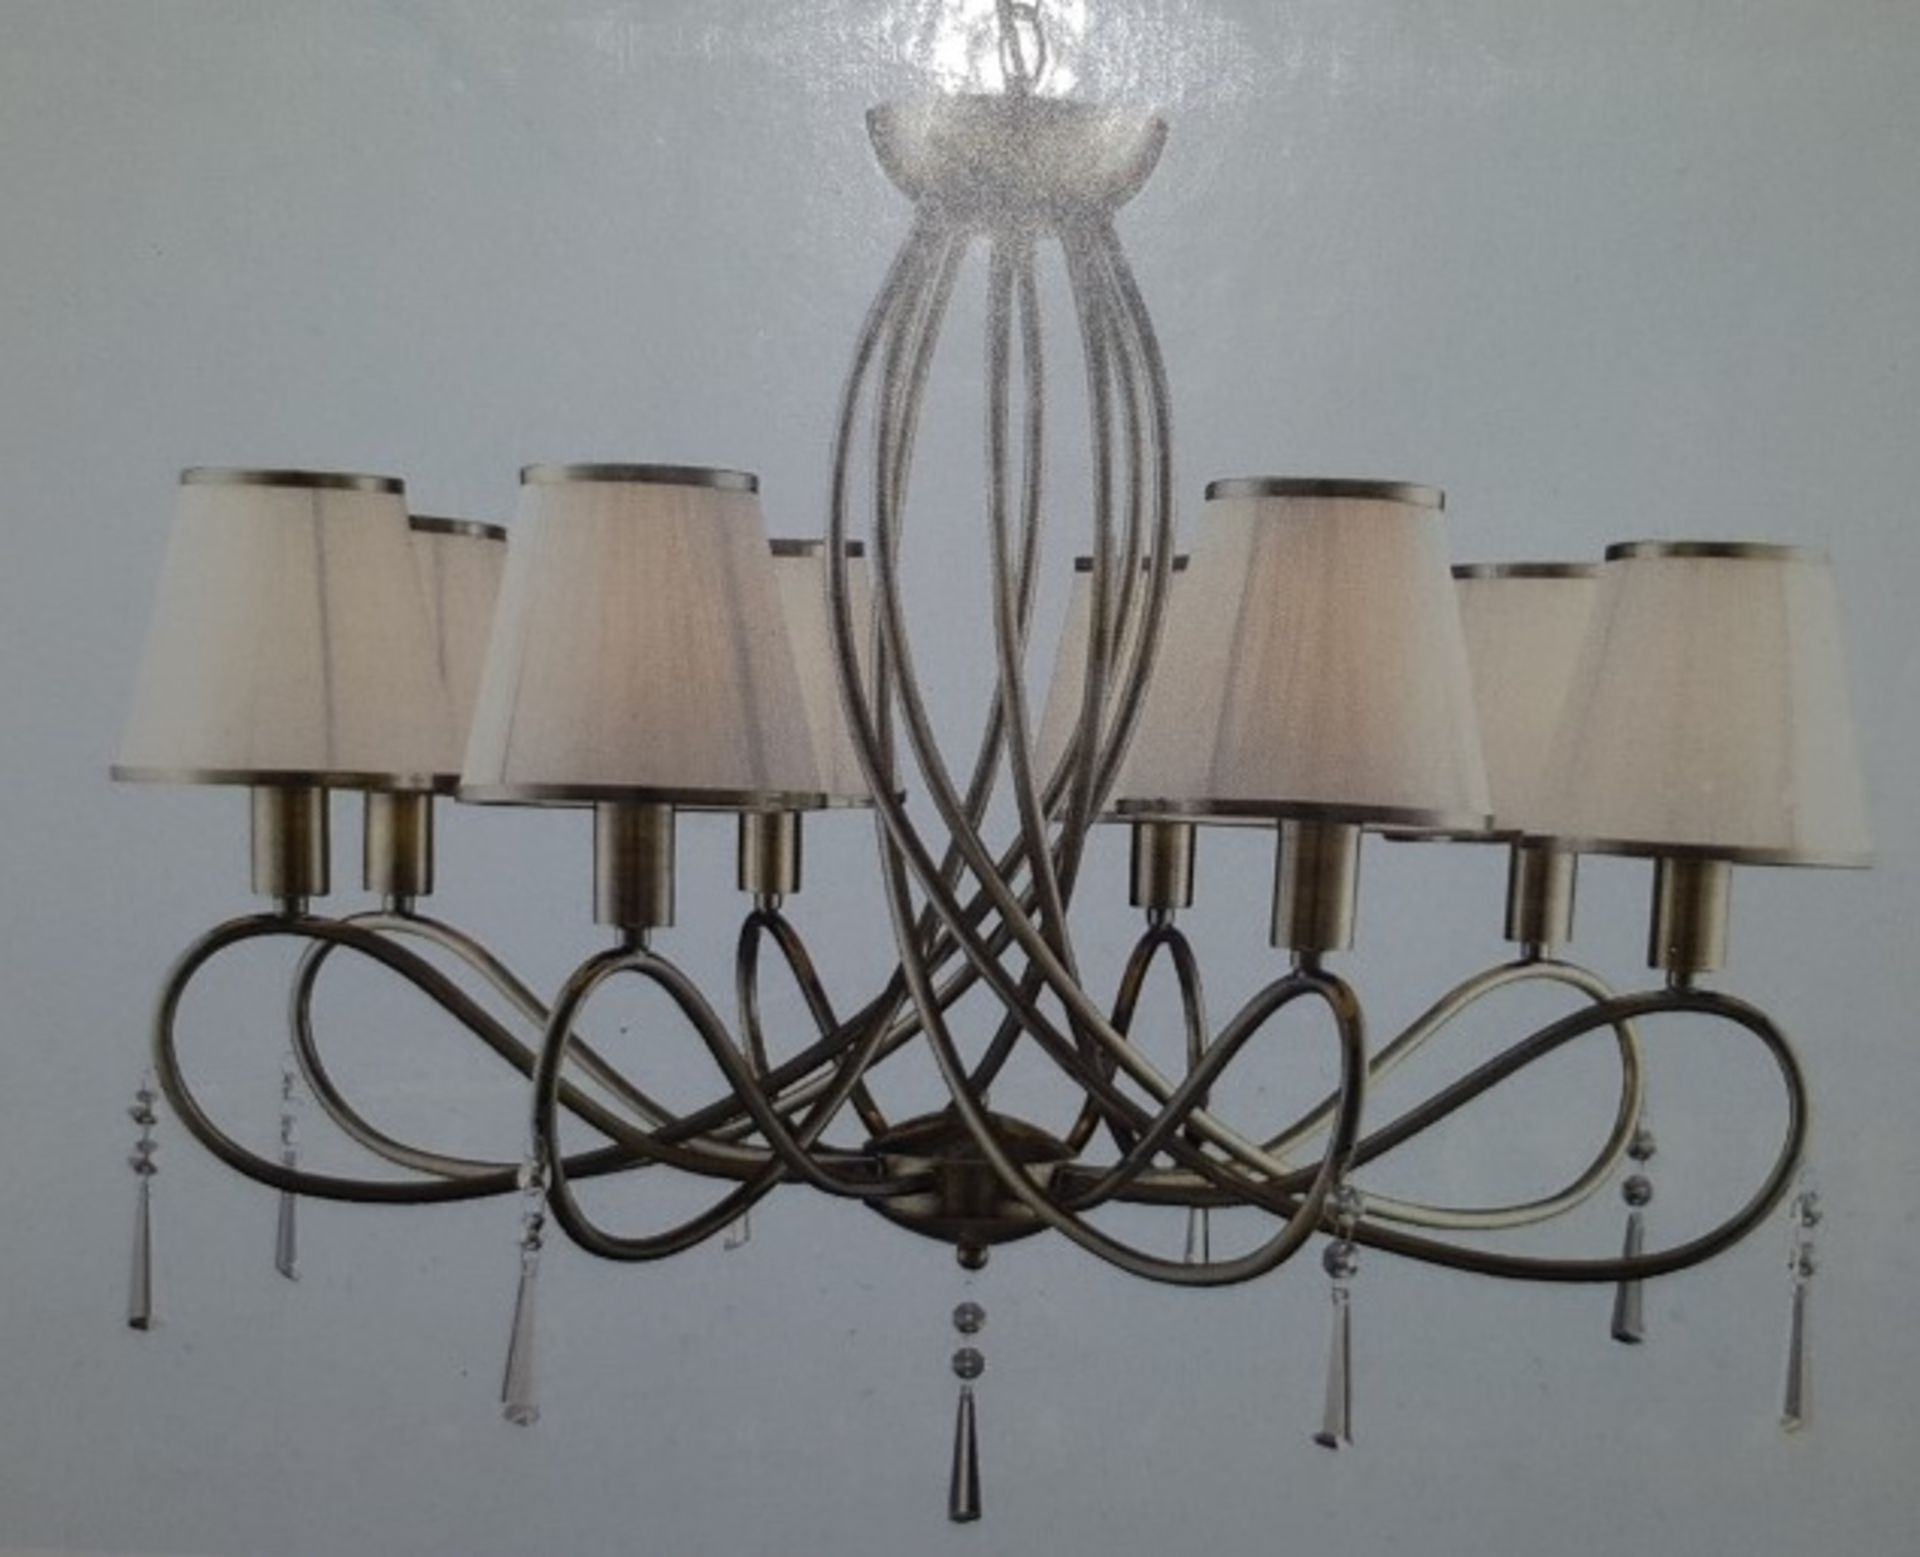 1 x Searchlight Simplicity 8 Light Ceiling Chandelier in Antique Brass - Product Code 1038-8AB